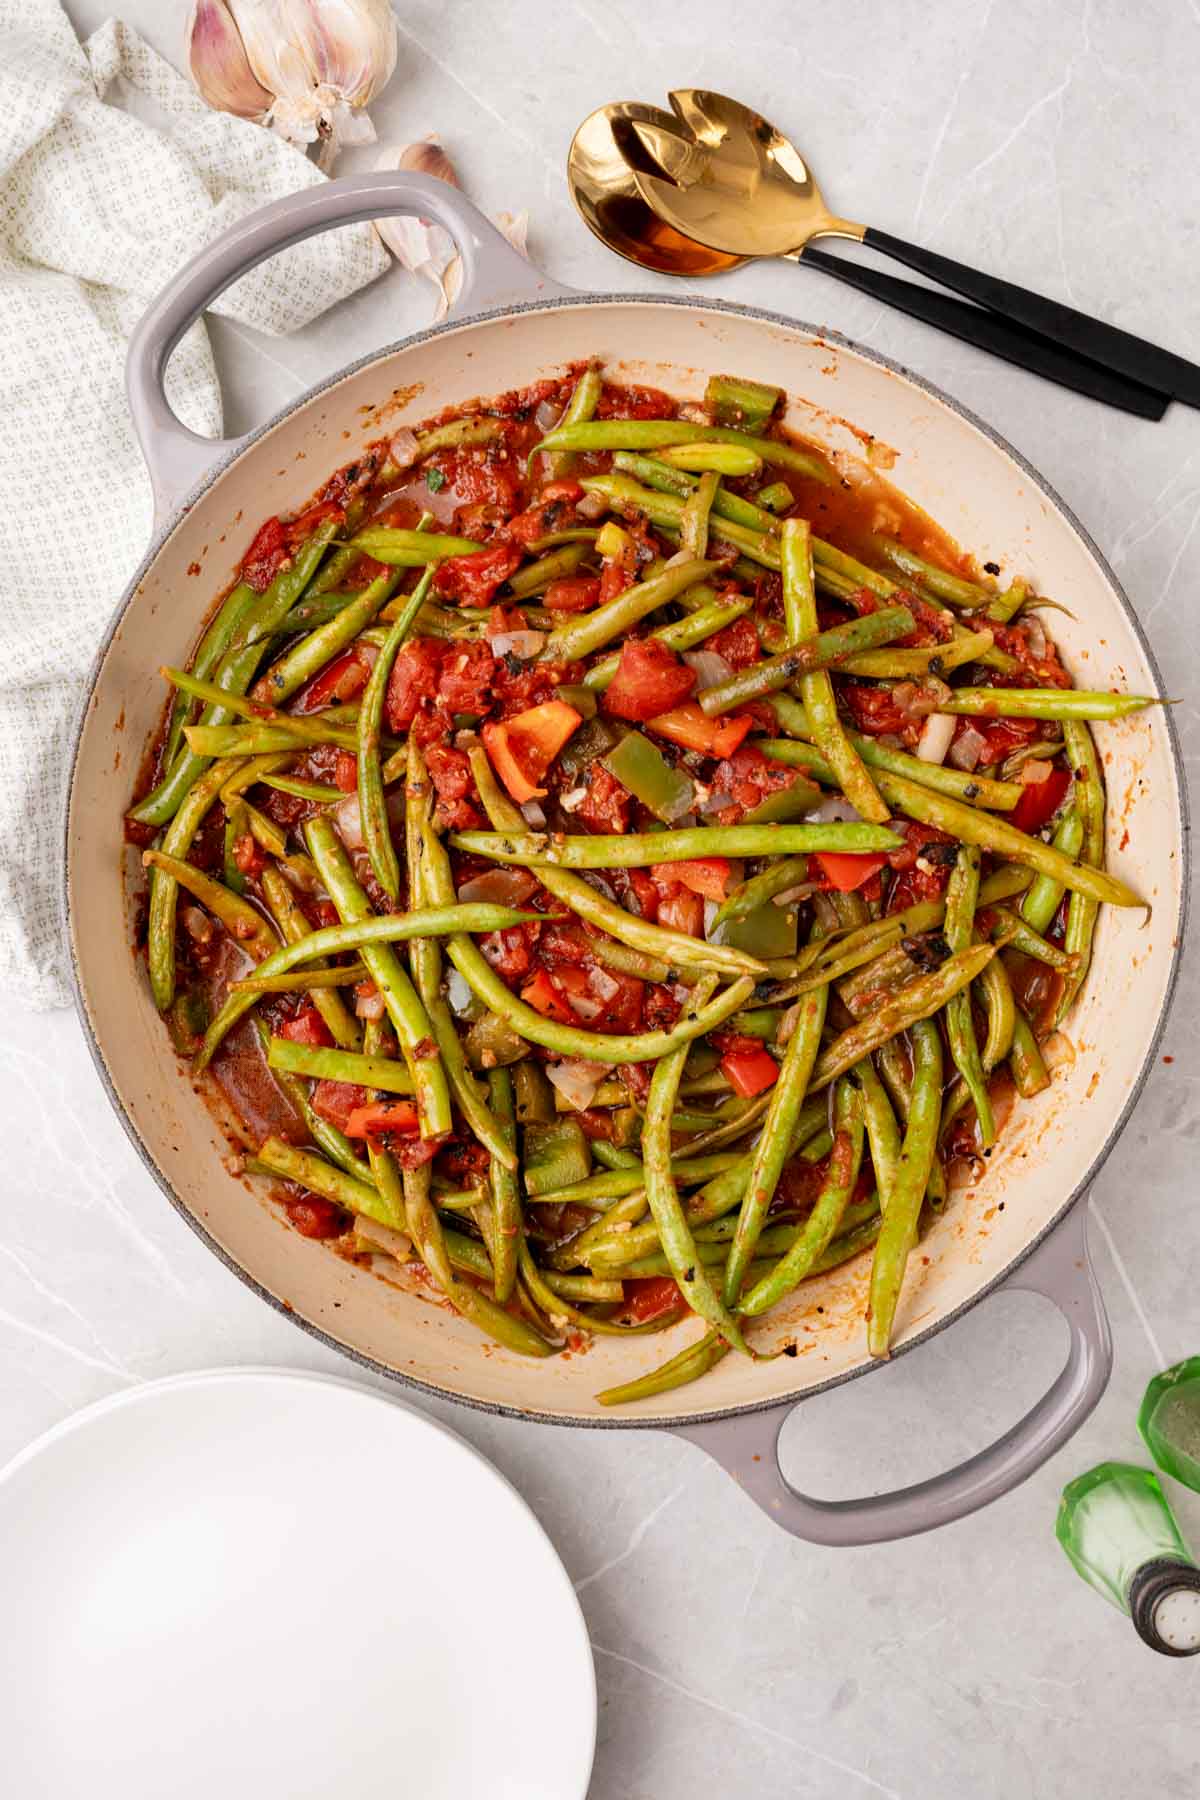 Pan with Green Beans with Stewed Tomatoes seen from above